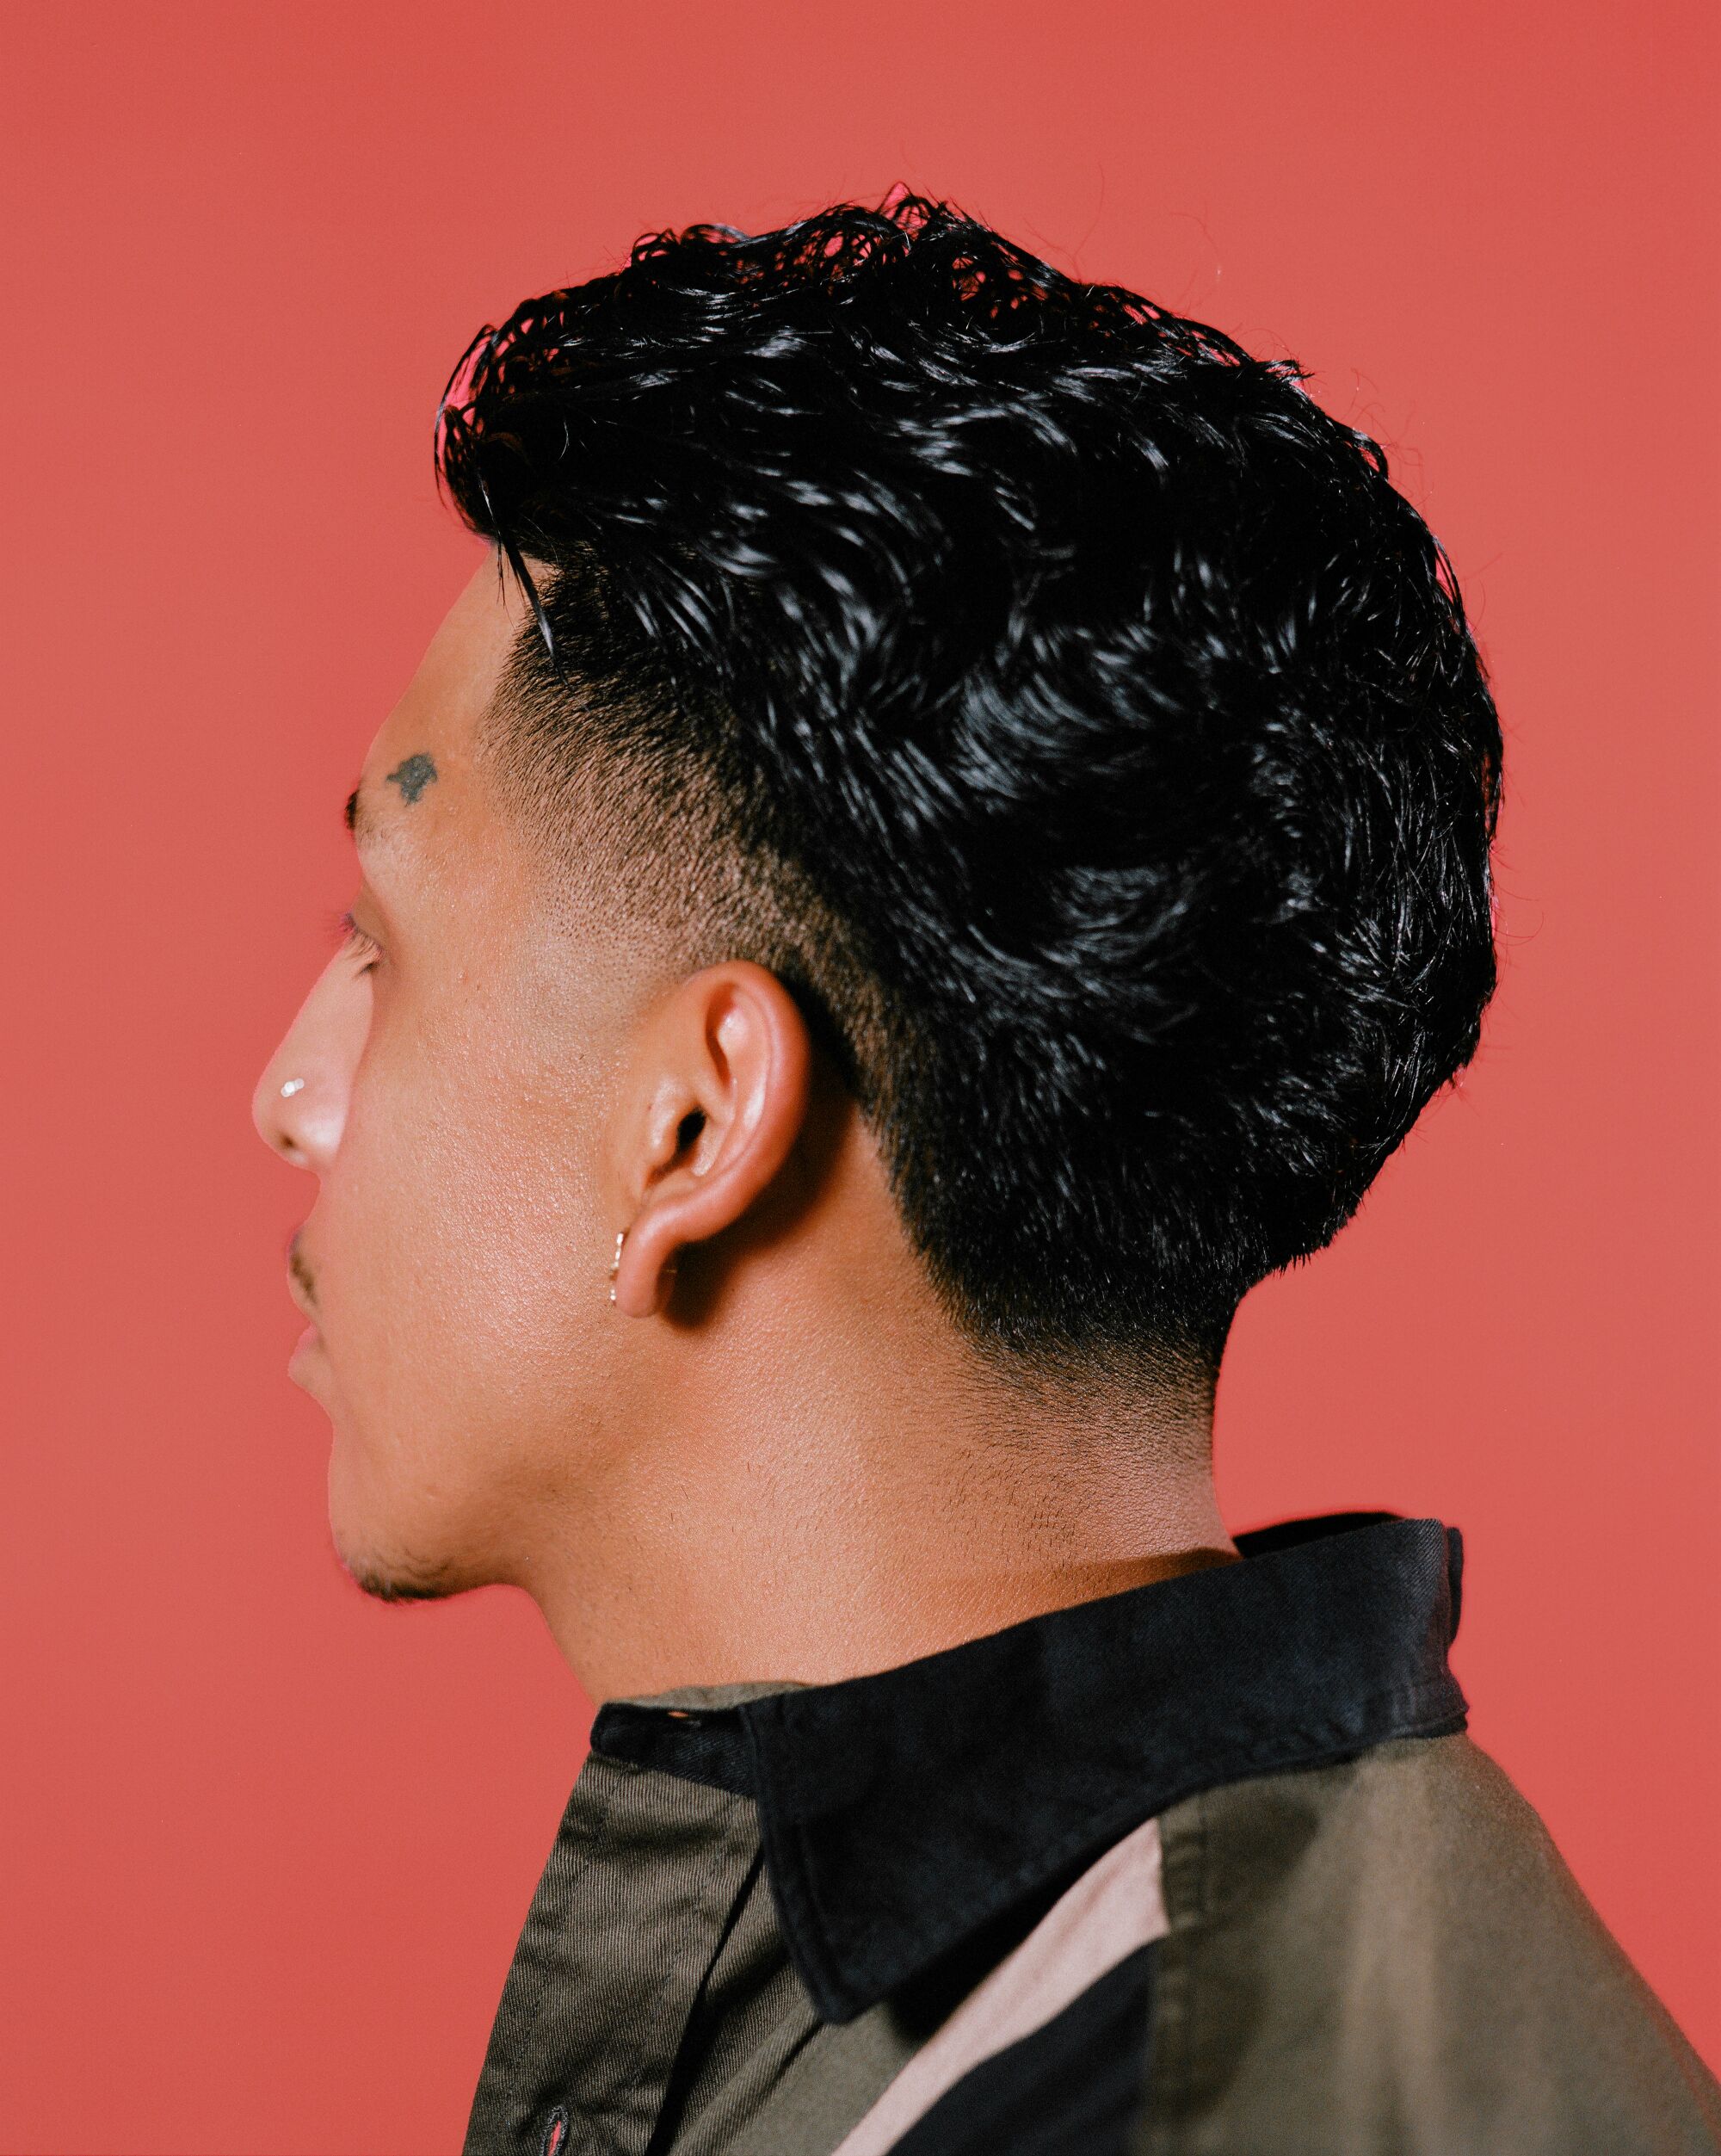 Image of a man looking away from the camera, the side profile of the Edgar haircut in view.